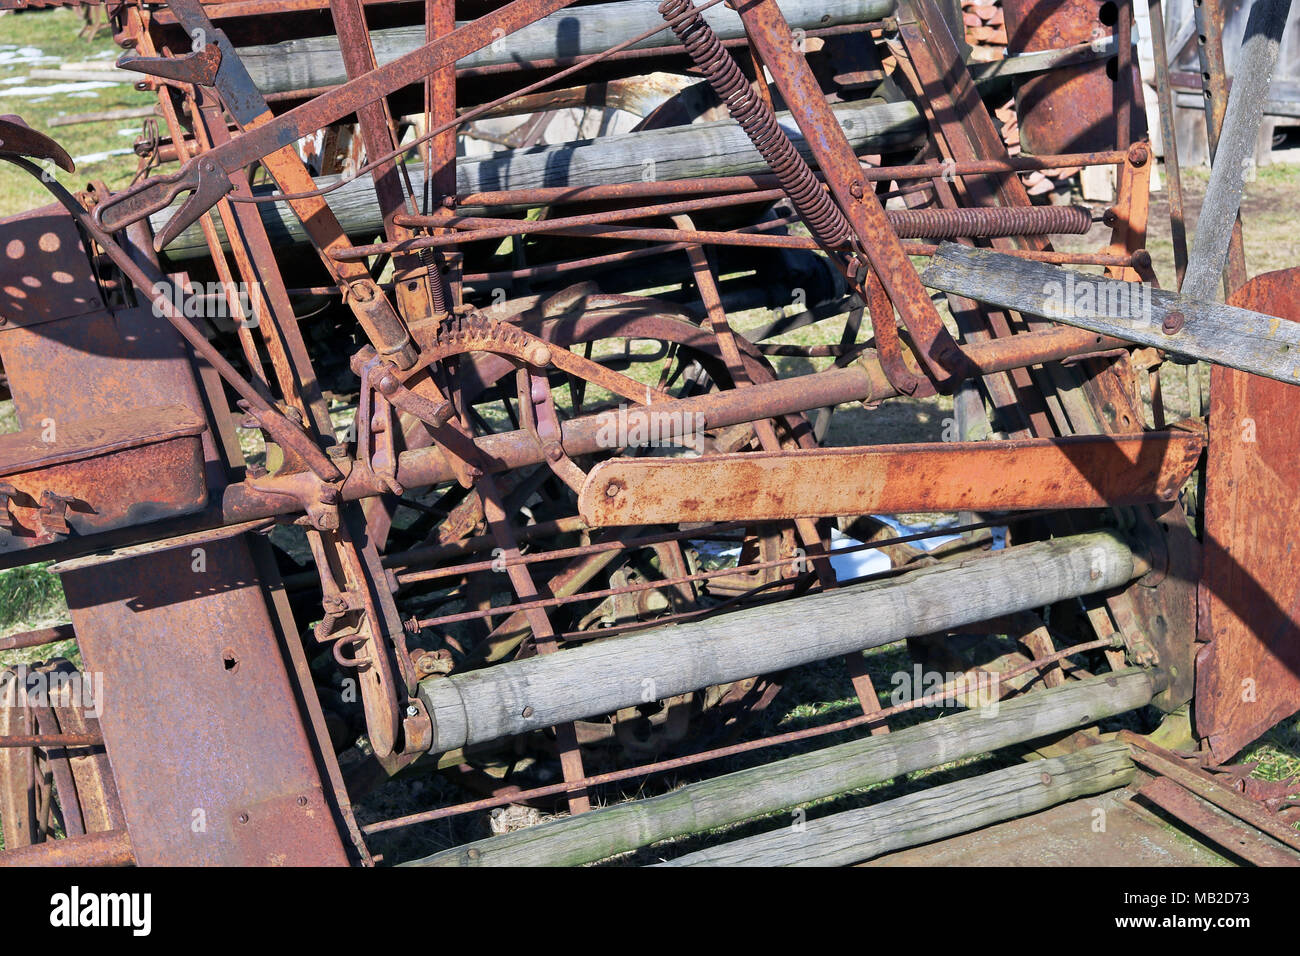 Abstract background from chaos and weaving of rusty metal parts of vintage agricultural machinery. Sunny day outdoor shot Stock Photo